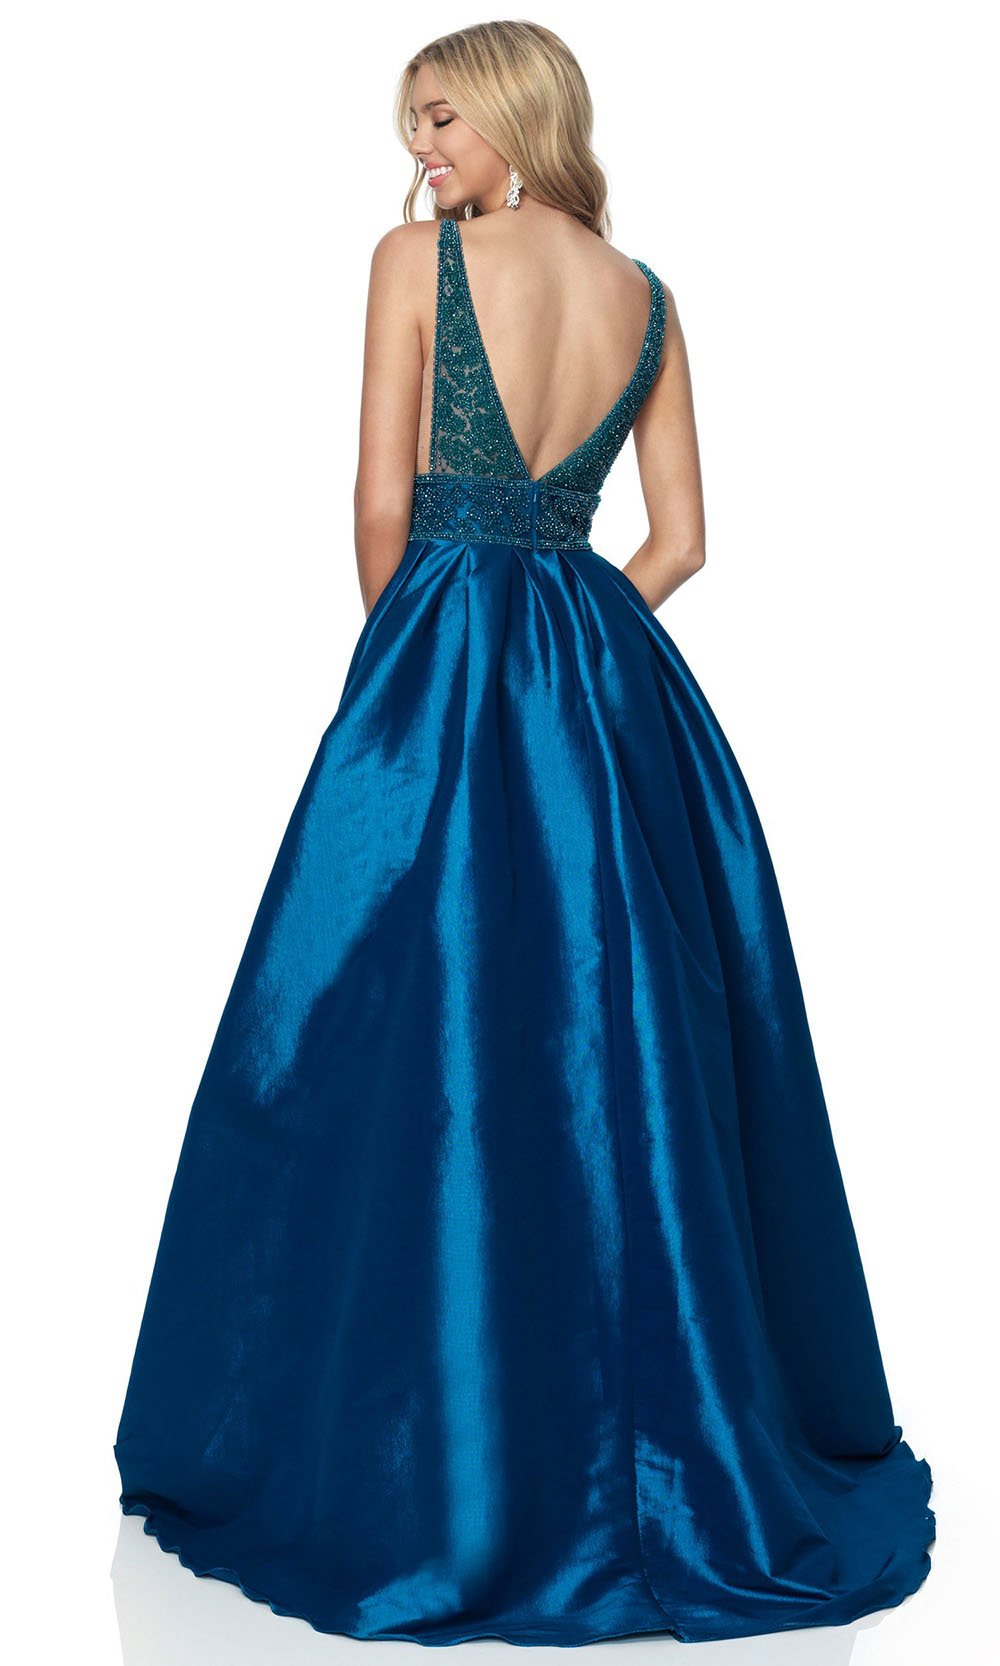 Pink by Blush - Sleeveless Beaded Bodice Stretch Taffeta Gown 5836SC In Blue